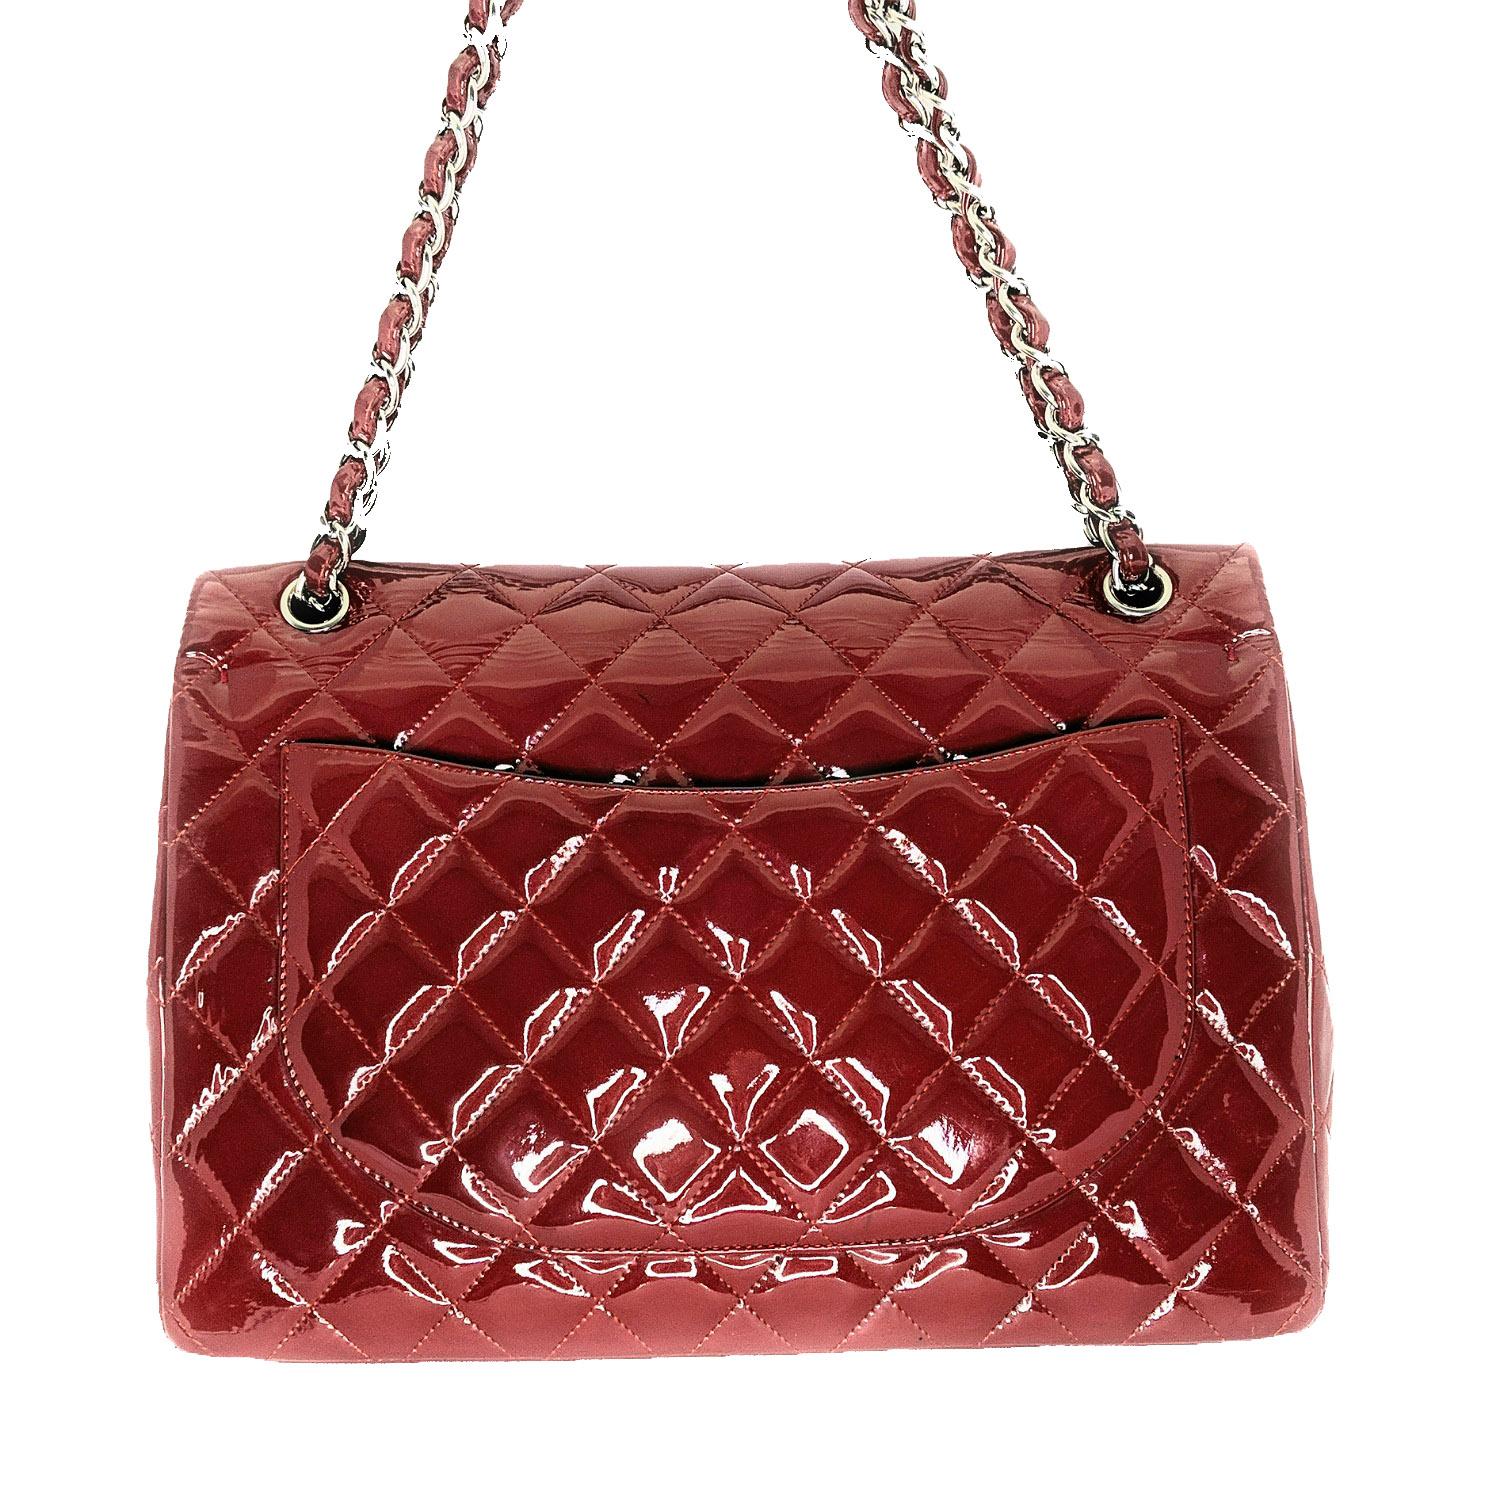 Prune diamond quilted Patent Calfskin leather Chanel Classic Maxi Double Flap bag with silver-tone metal hardware, convertible chain-link and leather shoulder strap, single patch pocket at back, single zip pocket at flap underside, three interior